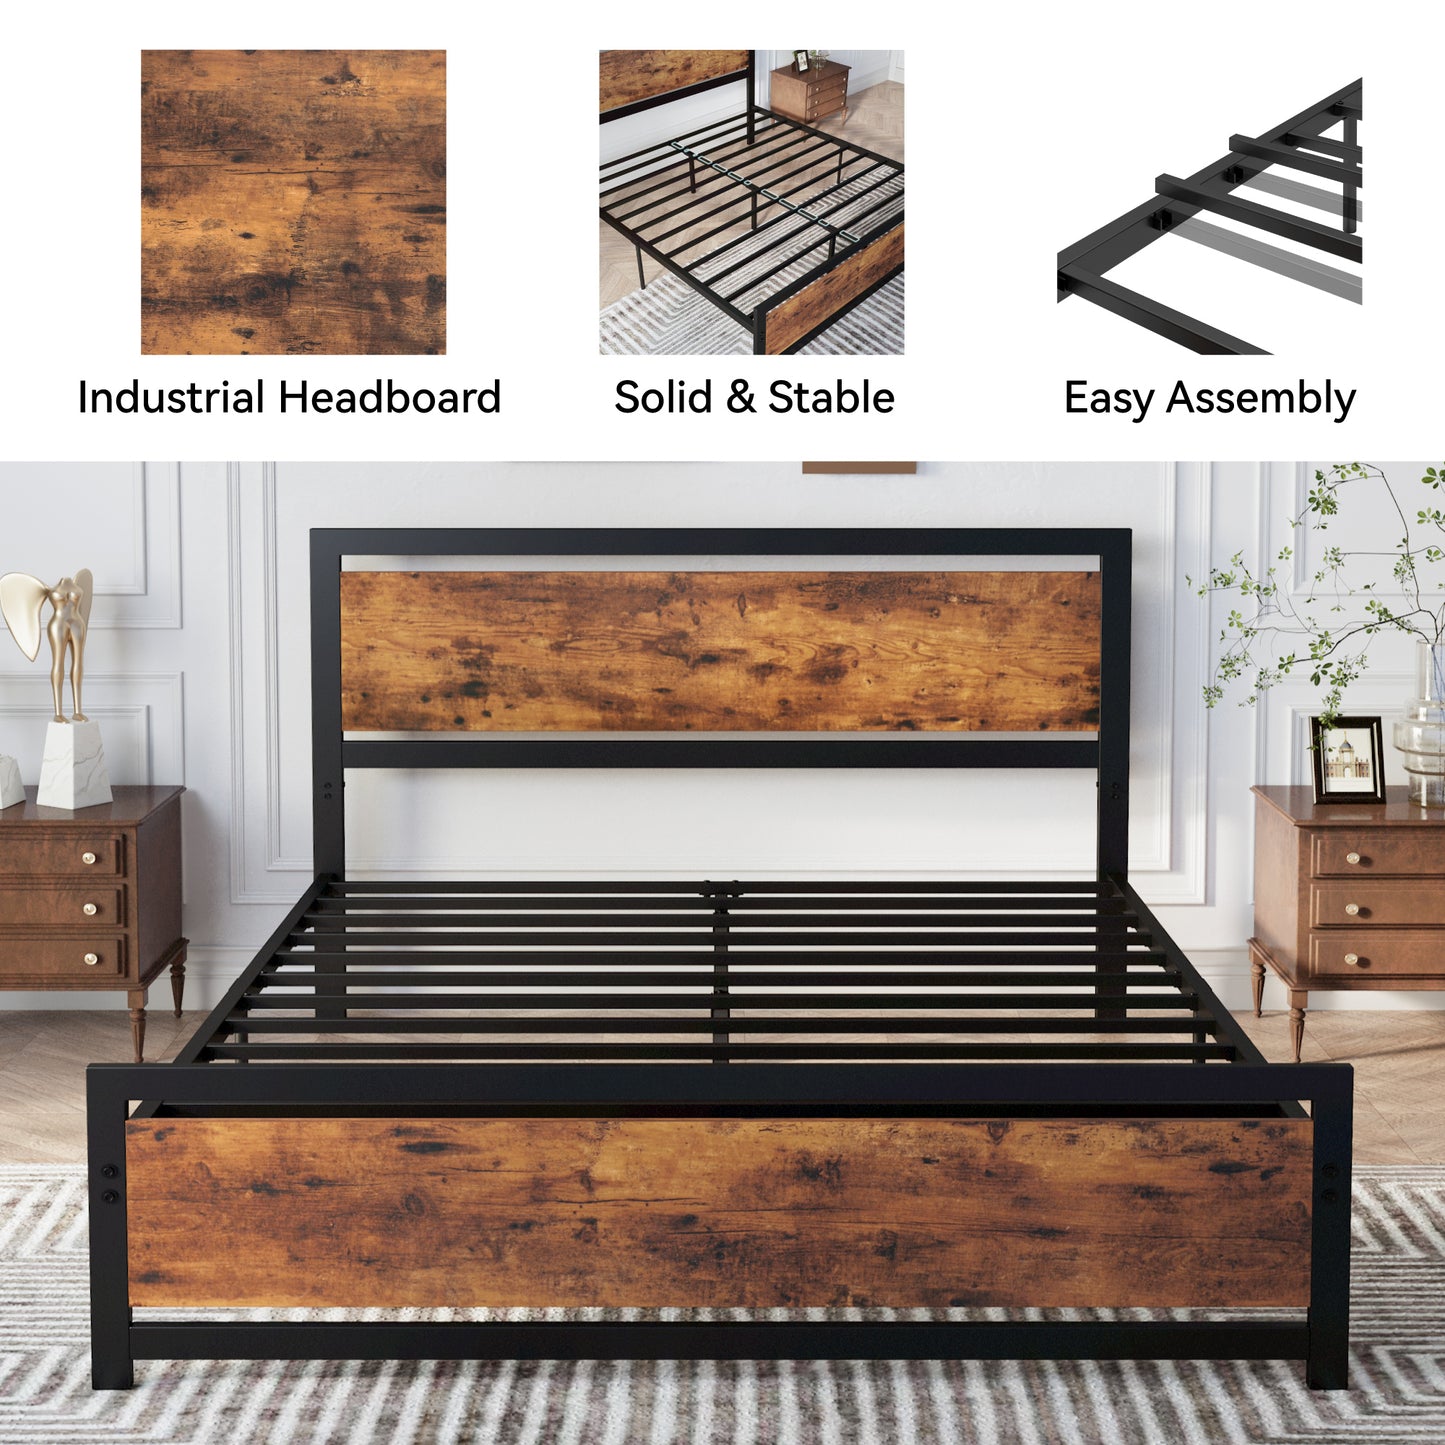 41" Bed Frame with Headboard and Footboard